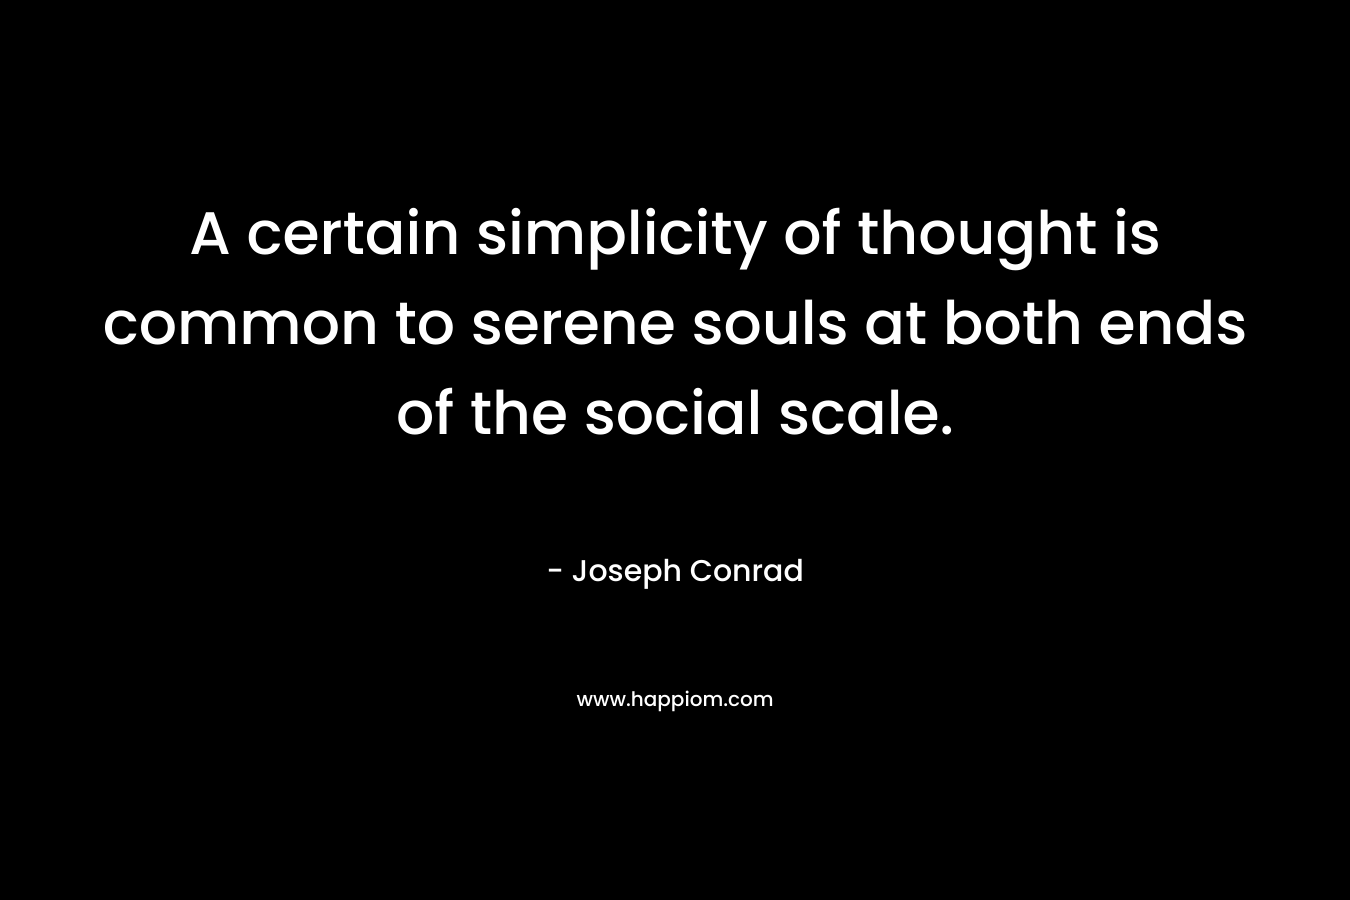 A certain simplicity of thought is common to serene souls at both ends of the social scale.